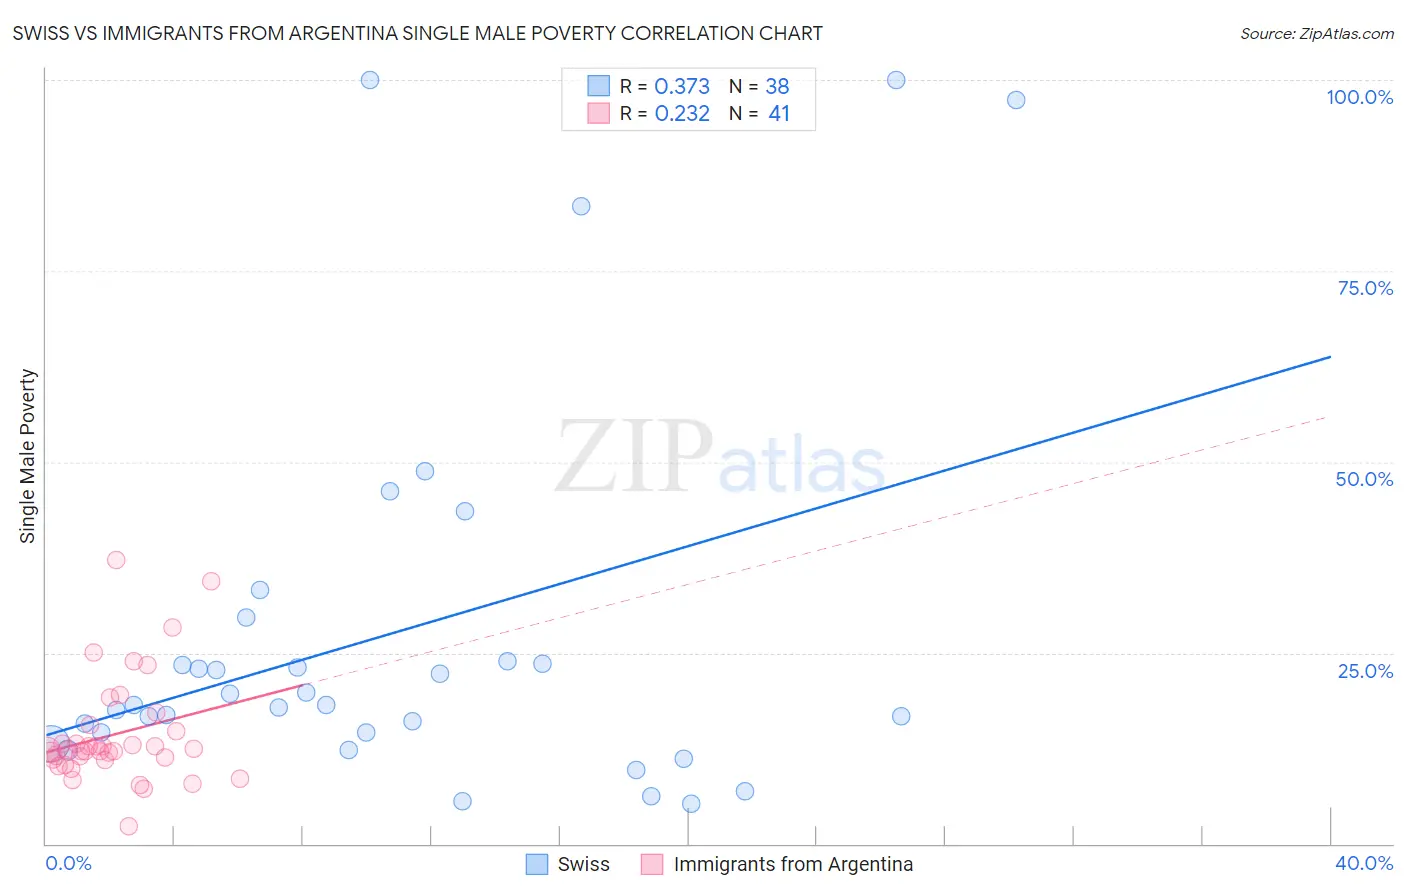 Swiss vs Immigrants from Argentina Single Male Poverty